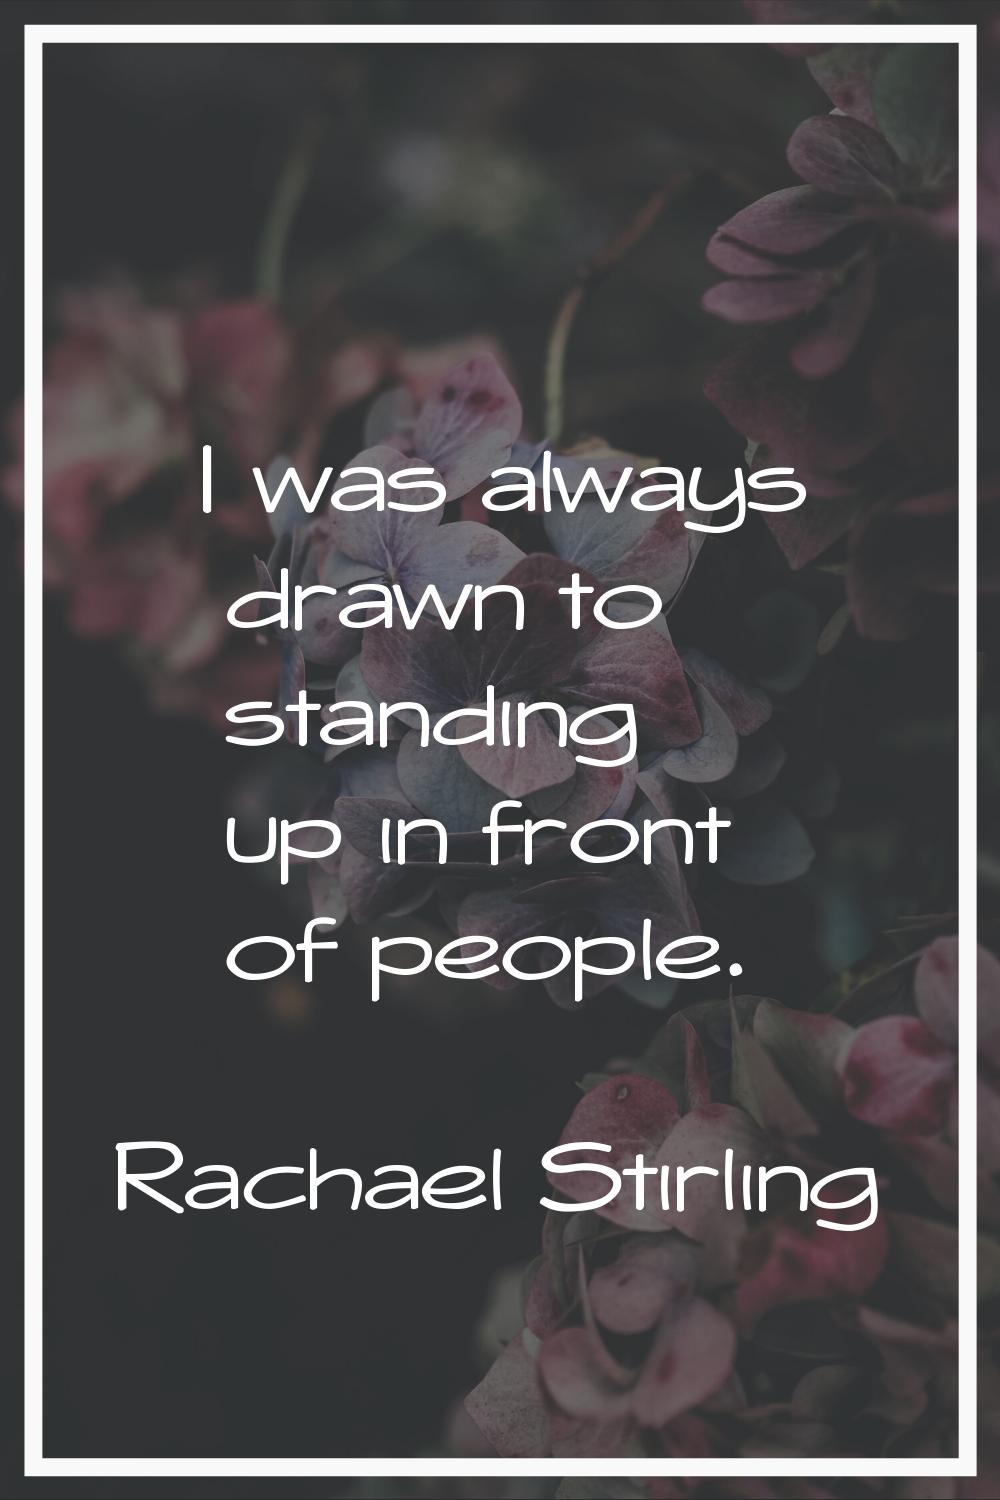 I was always drawn to standing up in front of people.